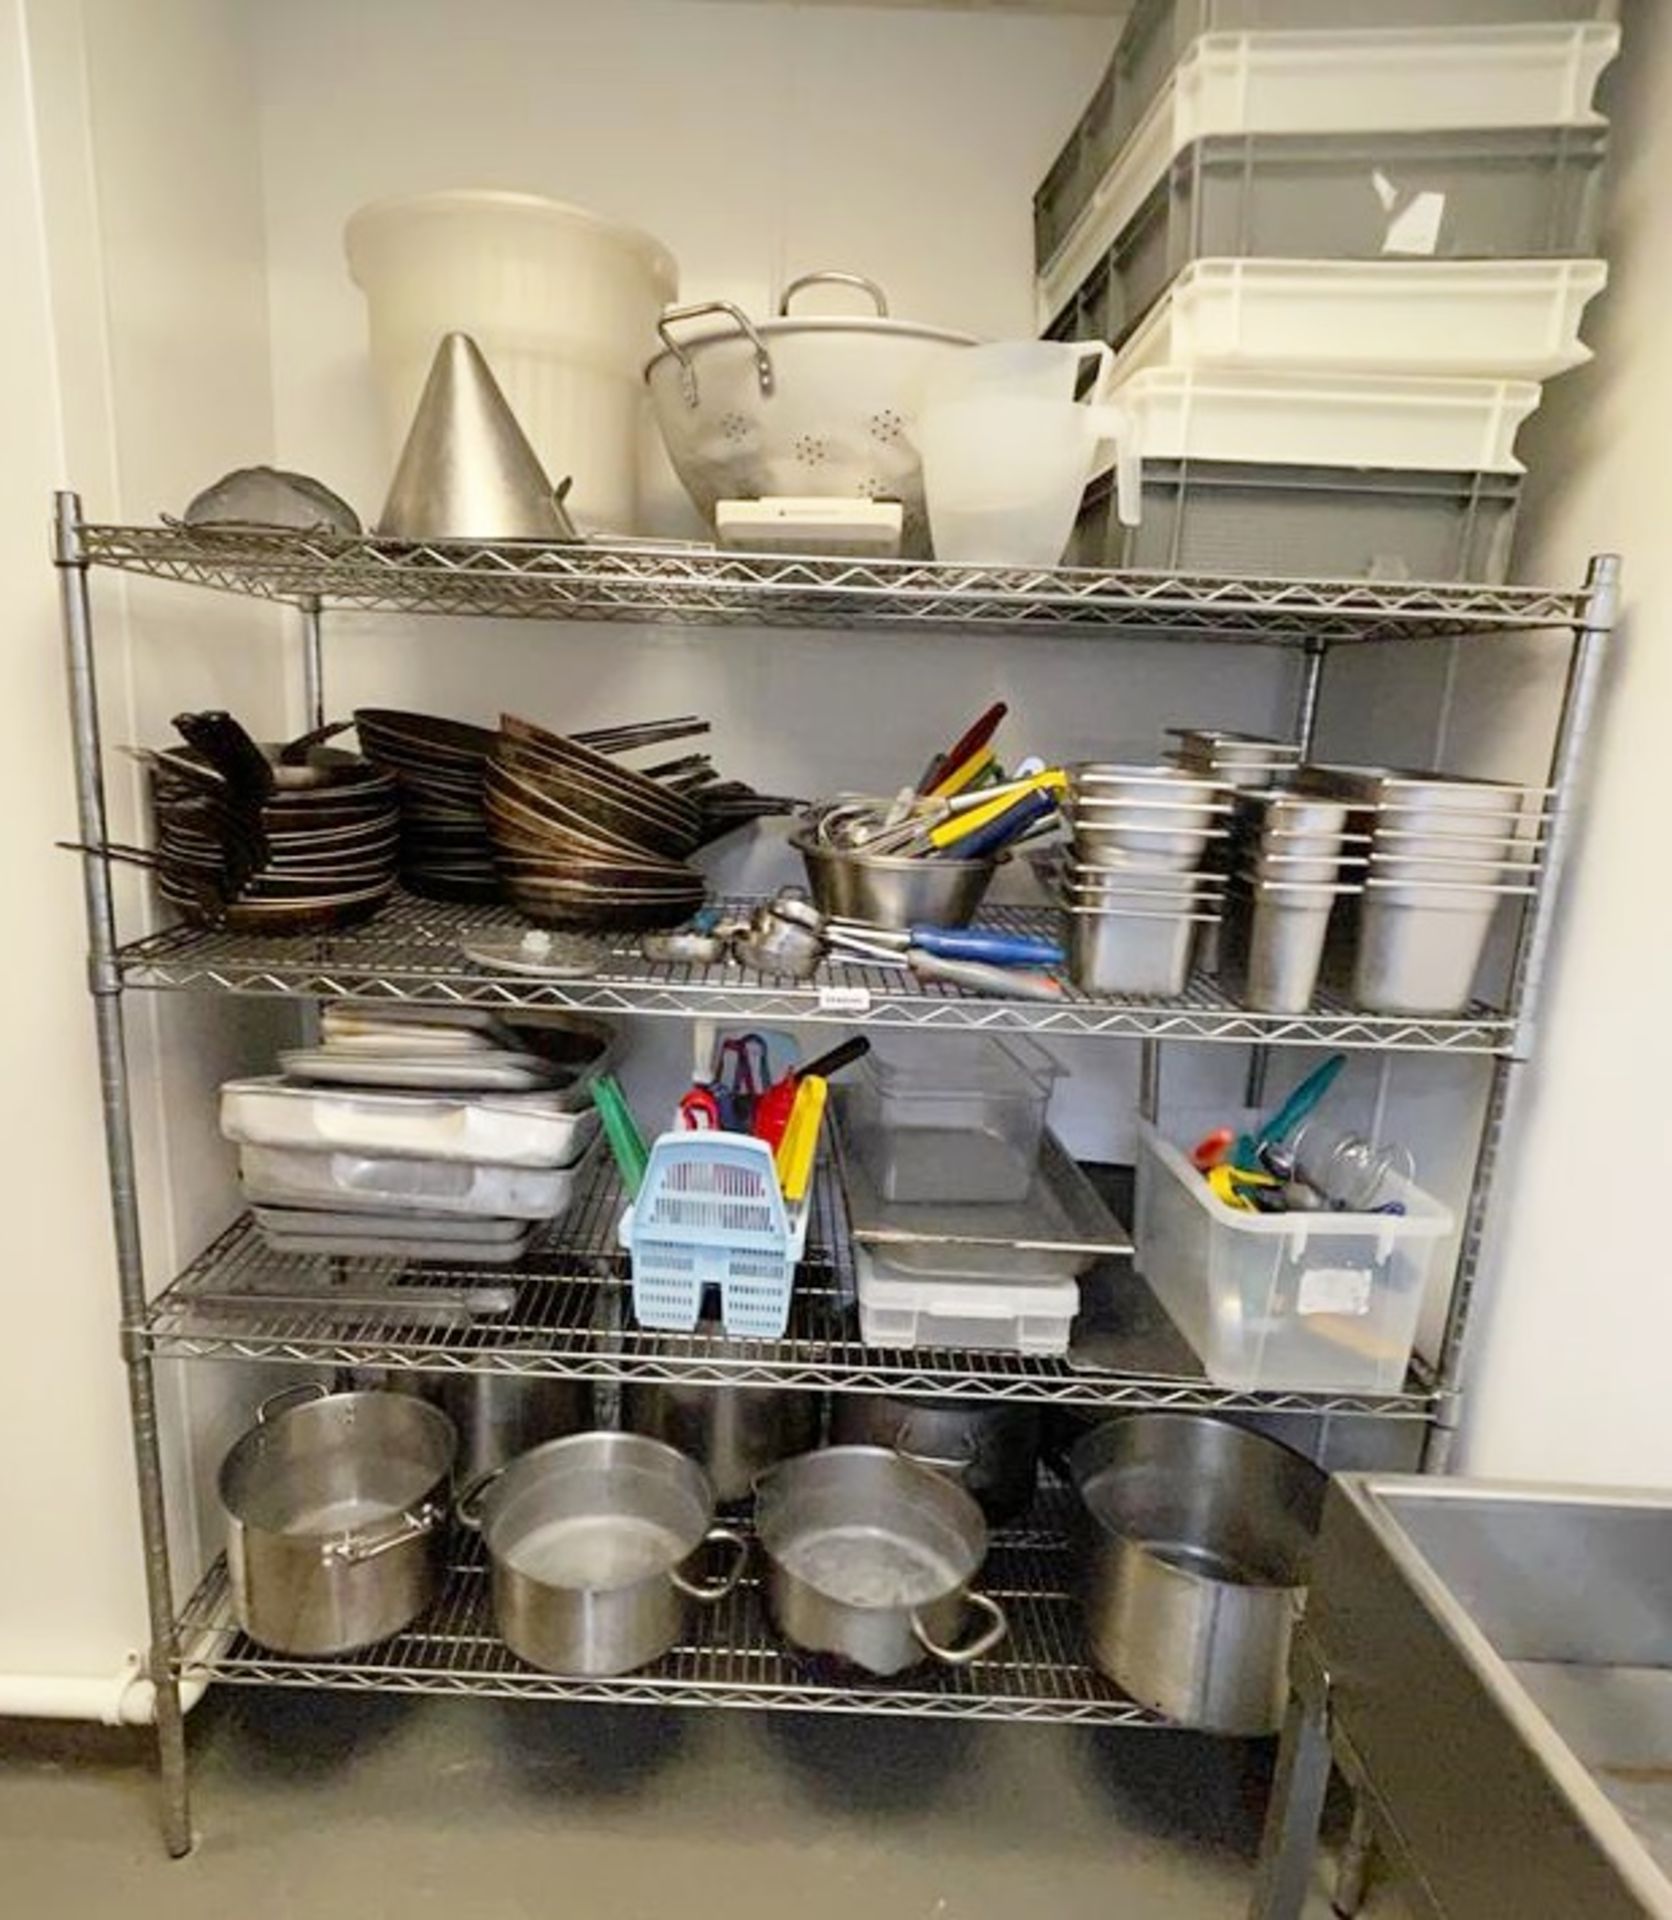 1 x Stainless Steel Shelving Unit With Contents - Contents Include Cooking Pans, Frying Pans, Gastro